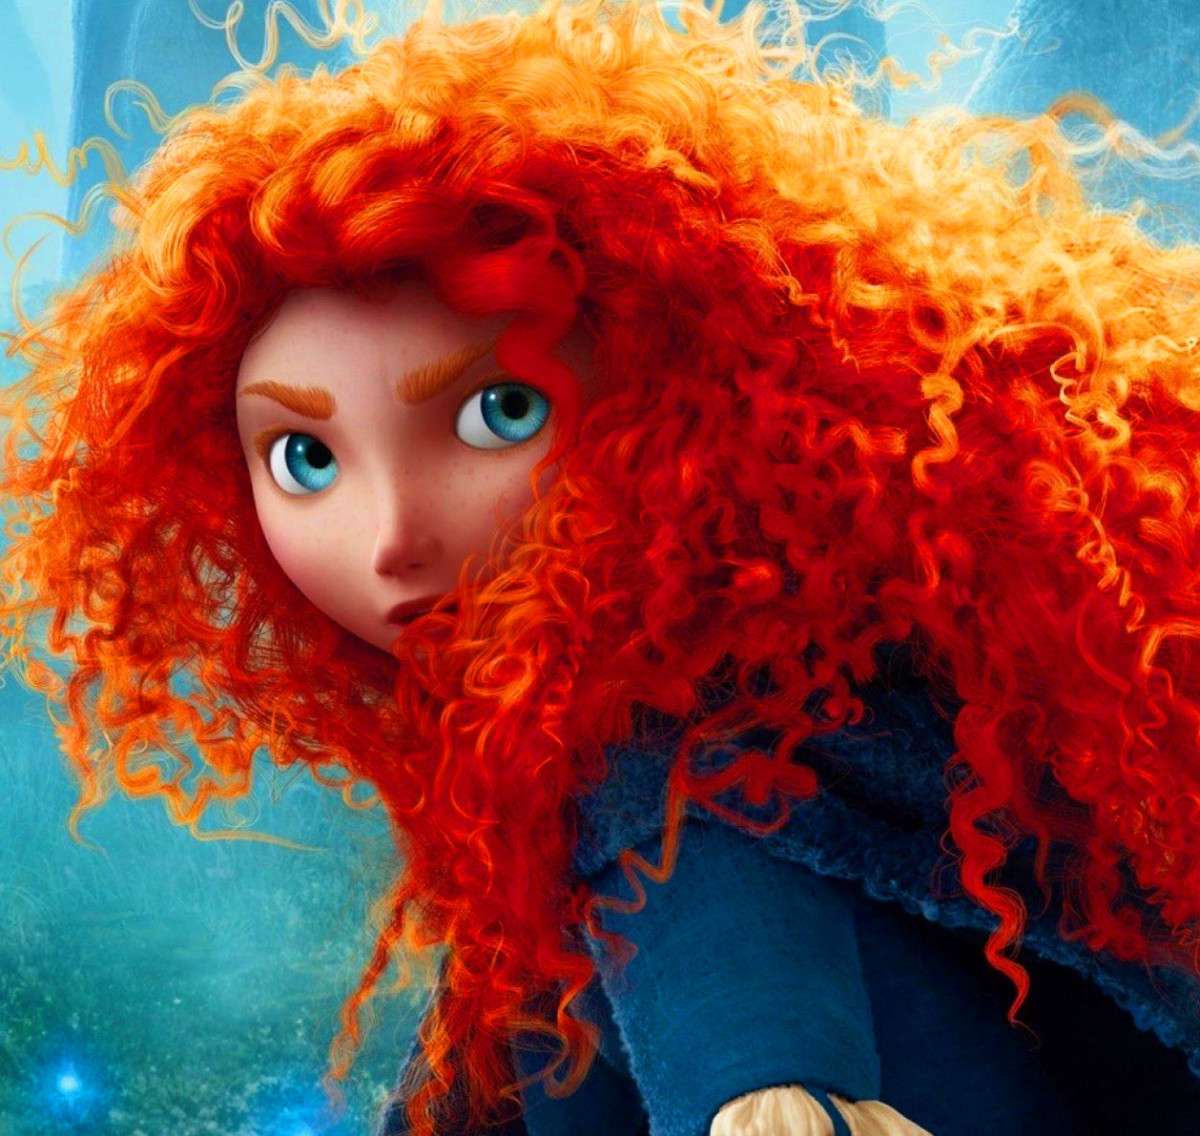 Merida stands with her red hair covering the lower half of her face.